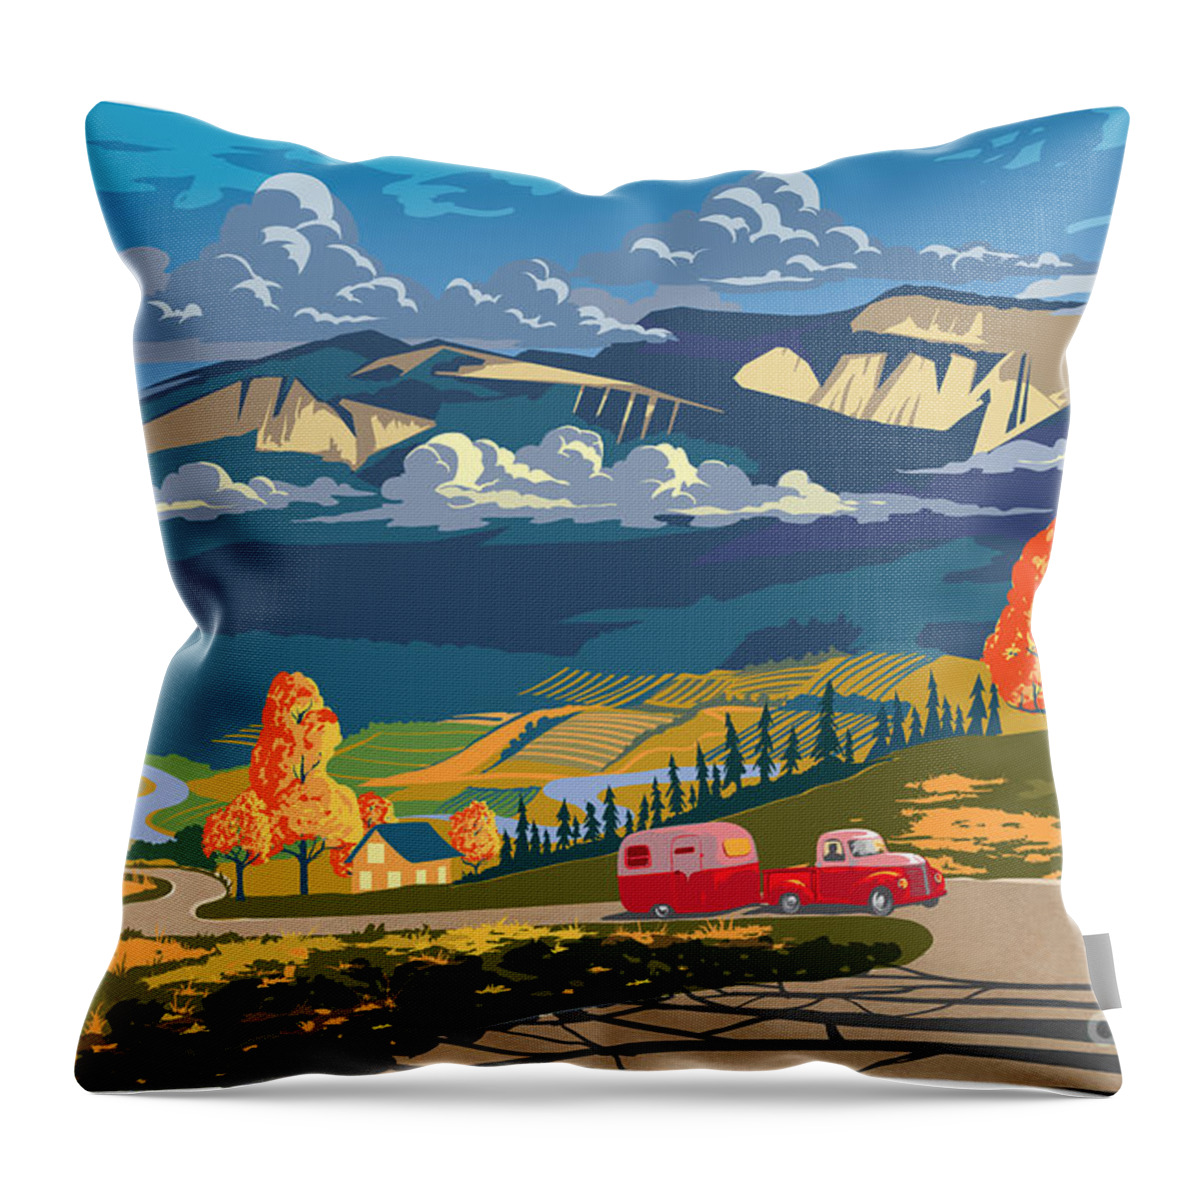 Travel Poster Throw Pillow featuring the painting Retro Travel Autumn Landscape by Sassan Filsoof